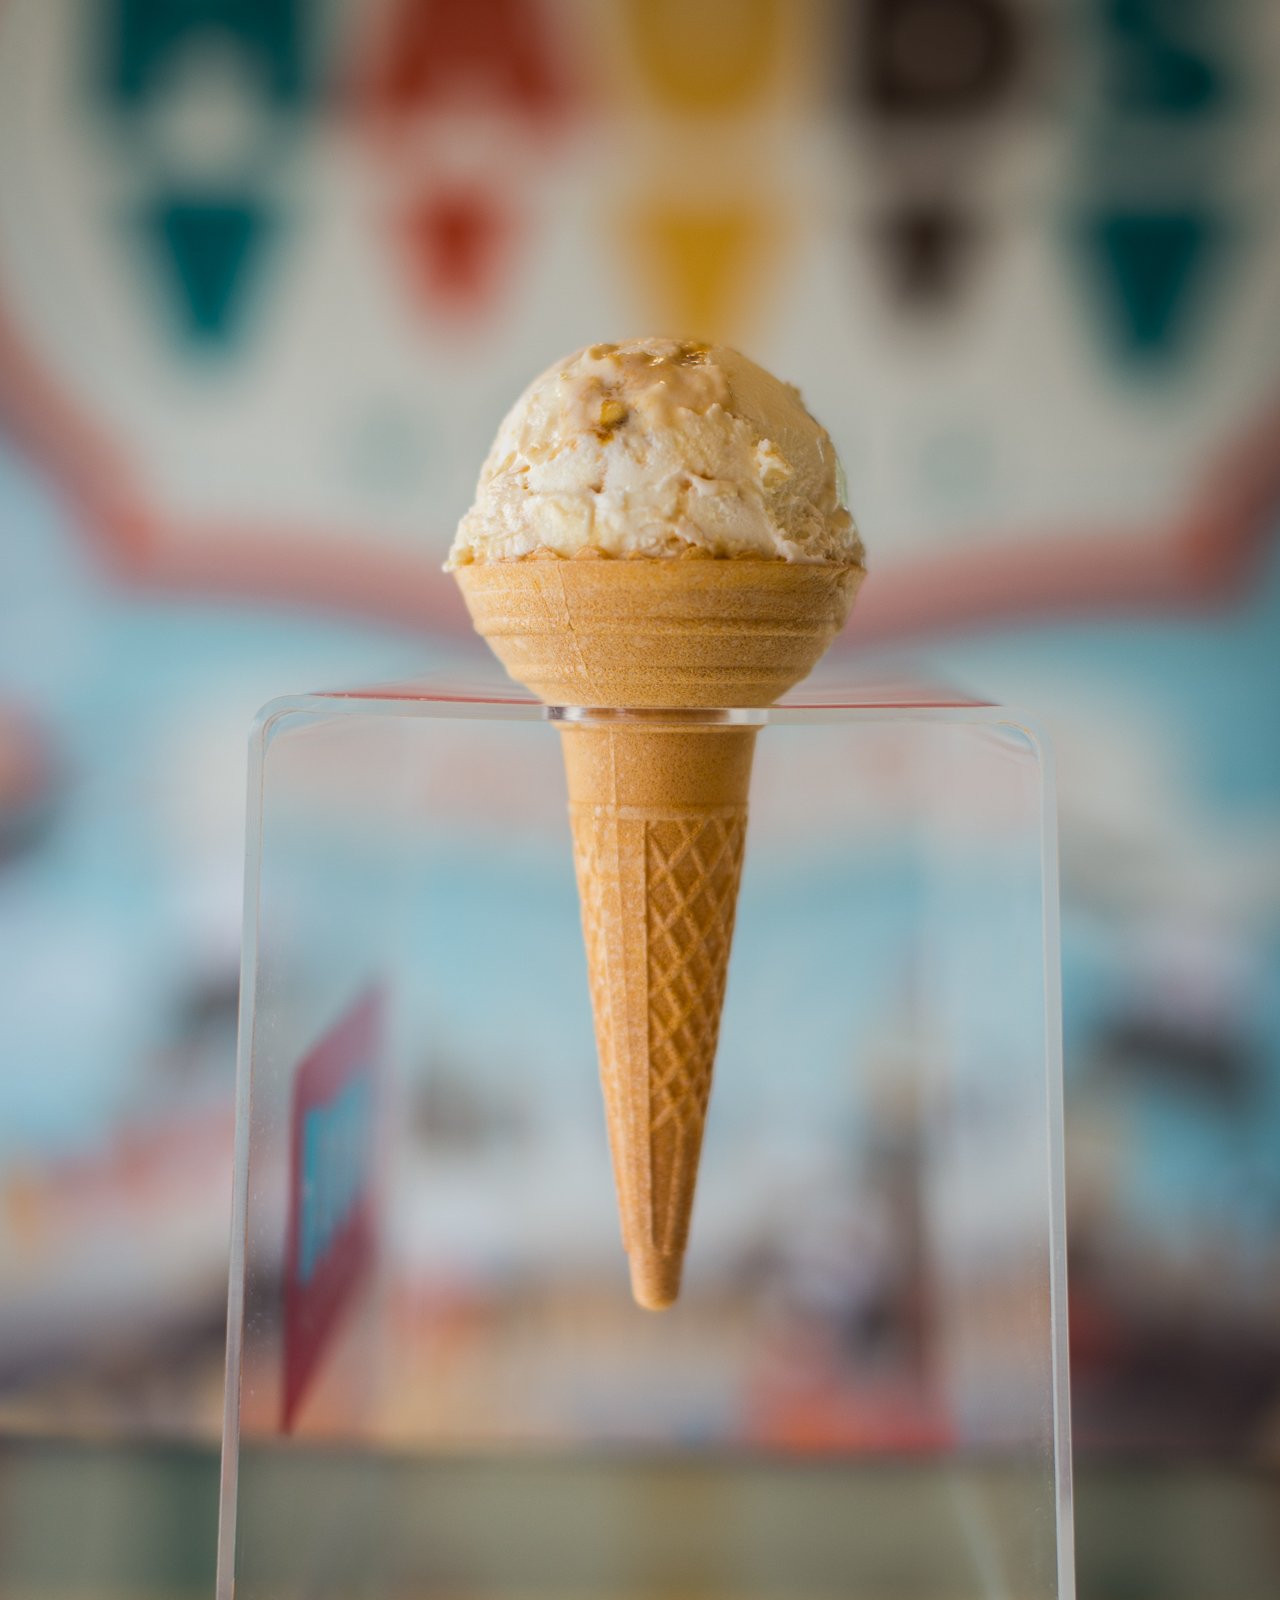 Welcome in the Bank Holiday Monday with a Mauds! Our Bangor, Holywood and Ormeau Road stores are open until 9pm tonight! 🕘

We'll be serving up all the scoops of our delicious ice cream! 🍦